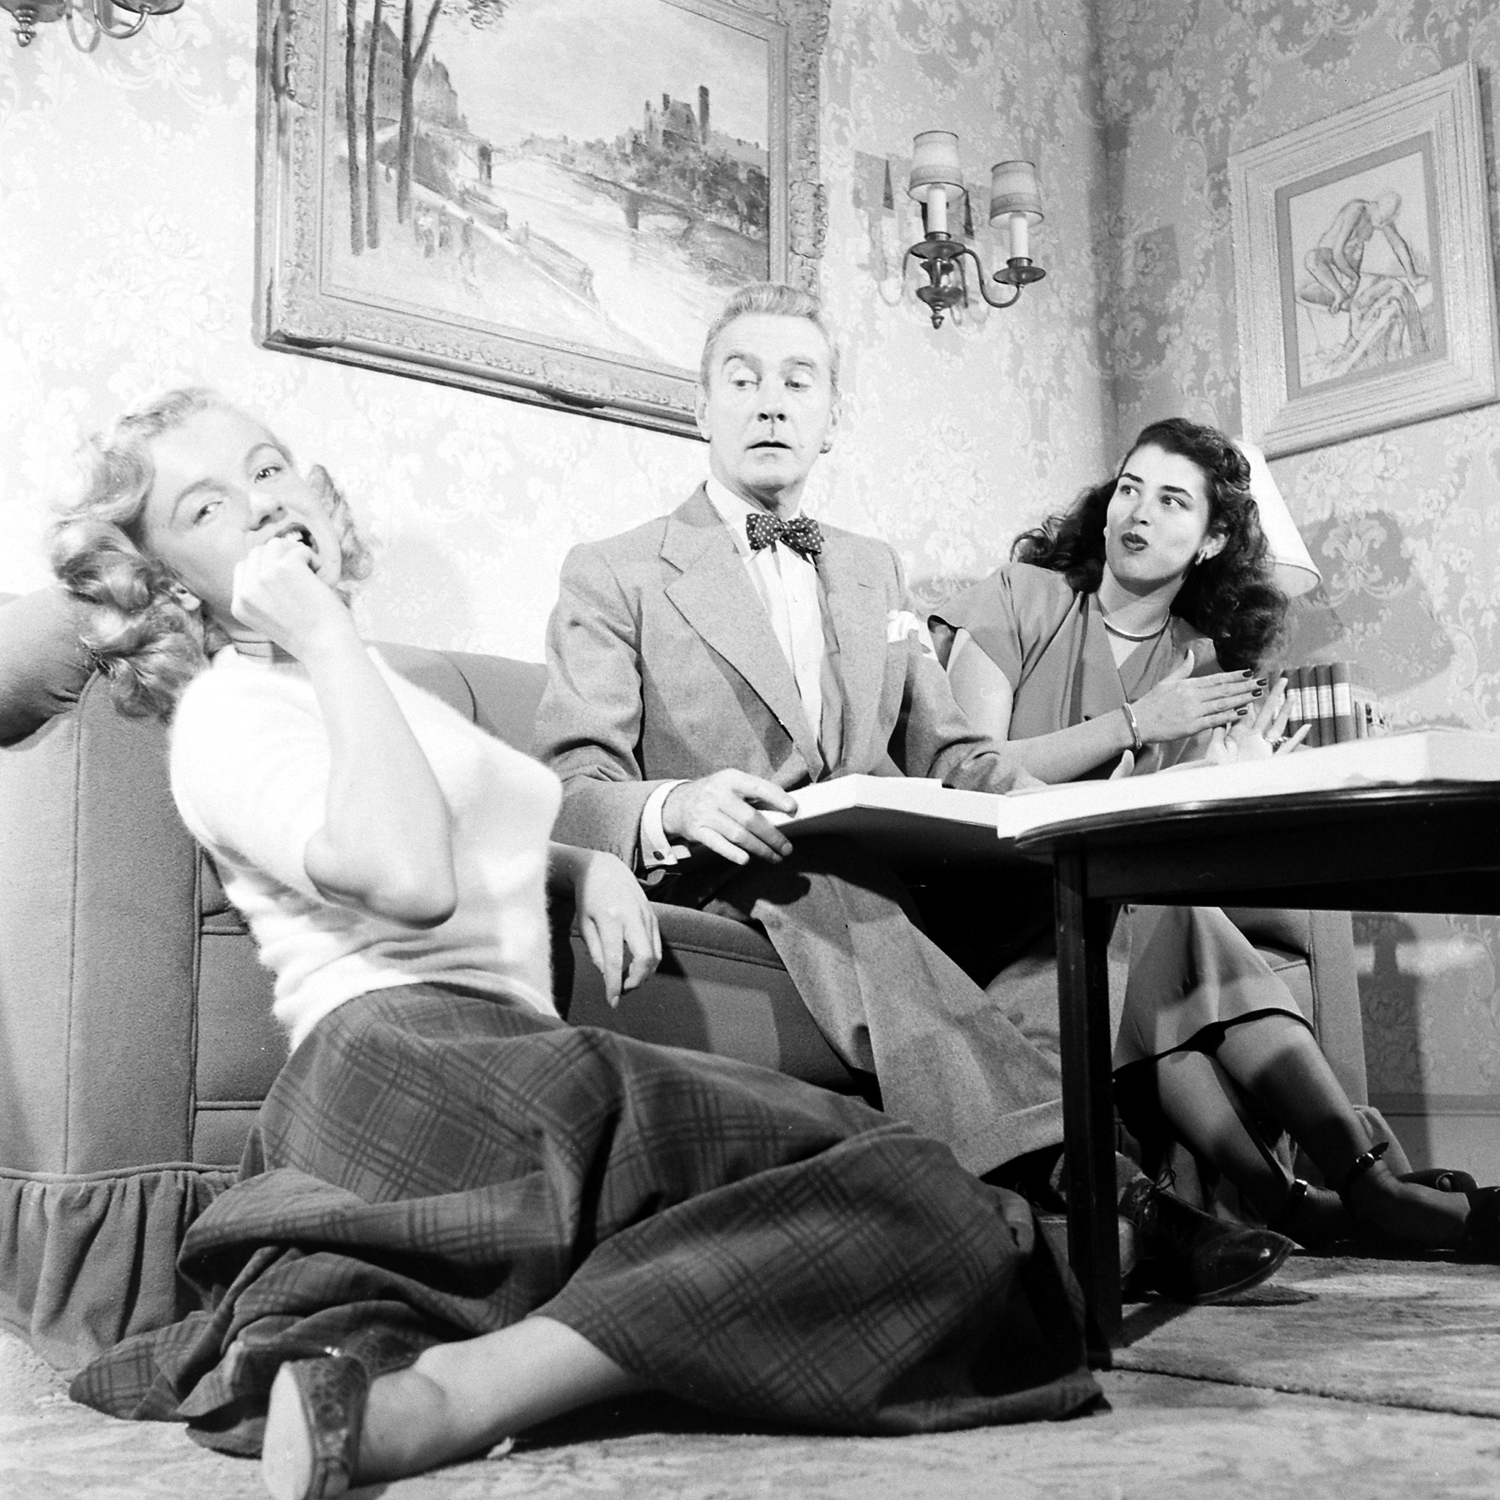 Then-unknown actress Marilyn Monroe with Clifton Webb and Laurette Luez on the set of a 1948 comedy, "Sitting Pretty."